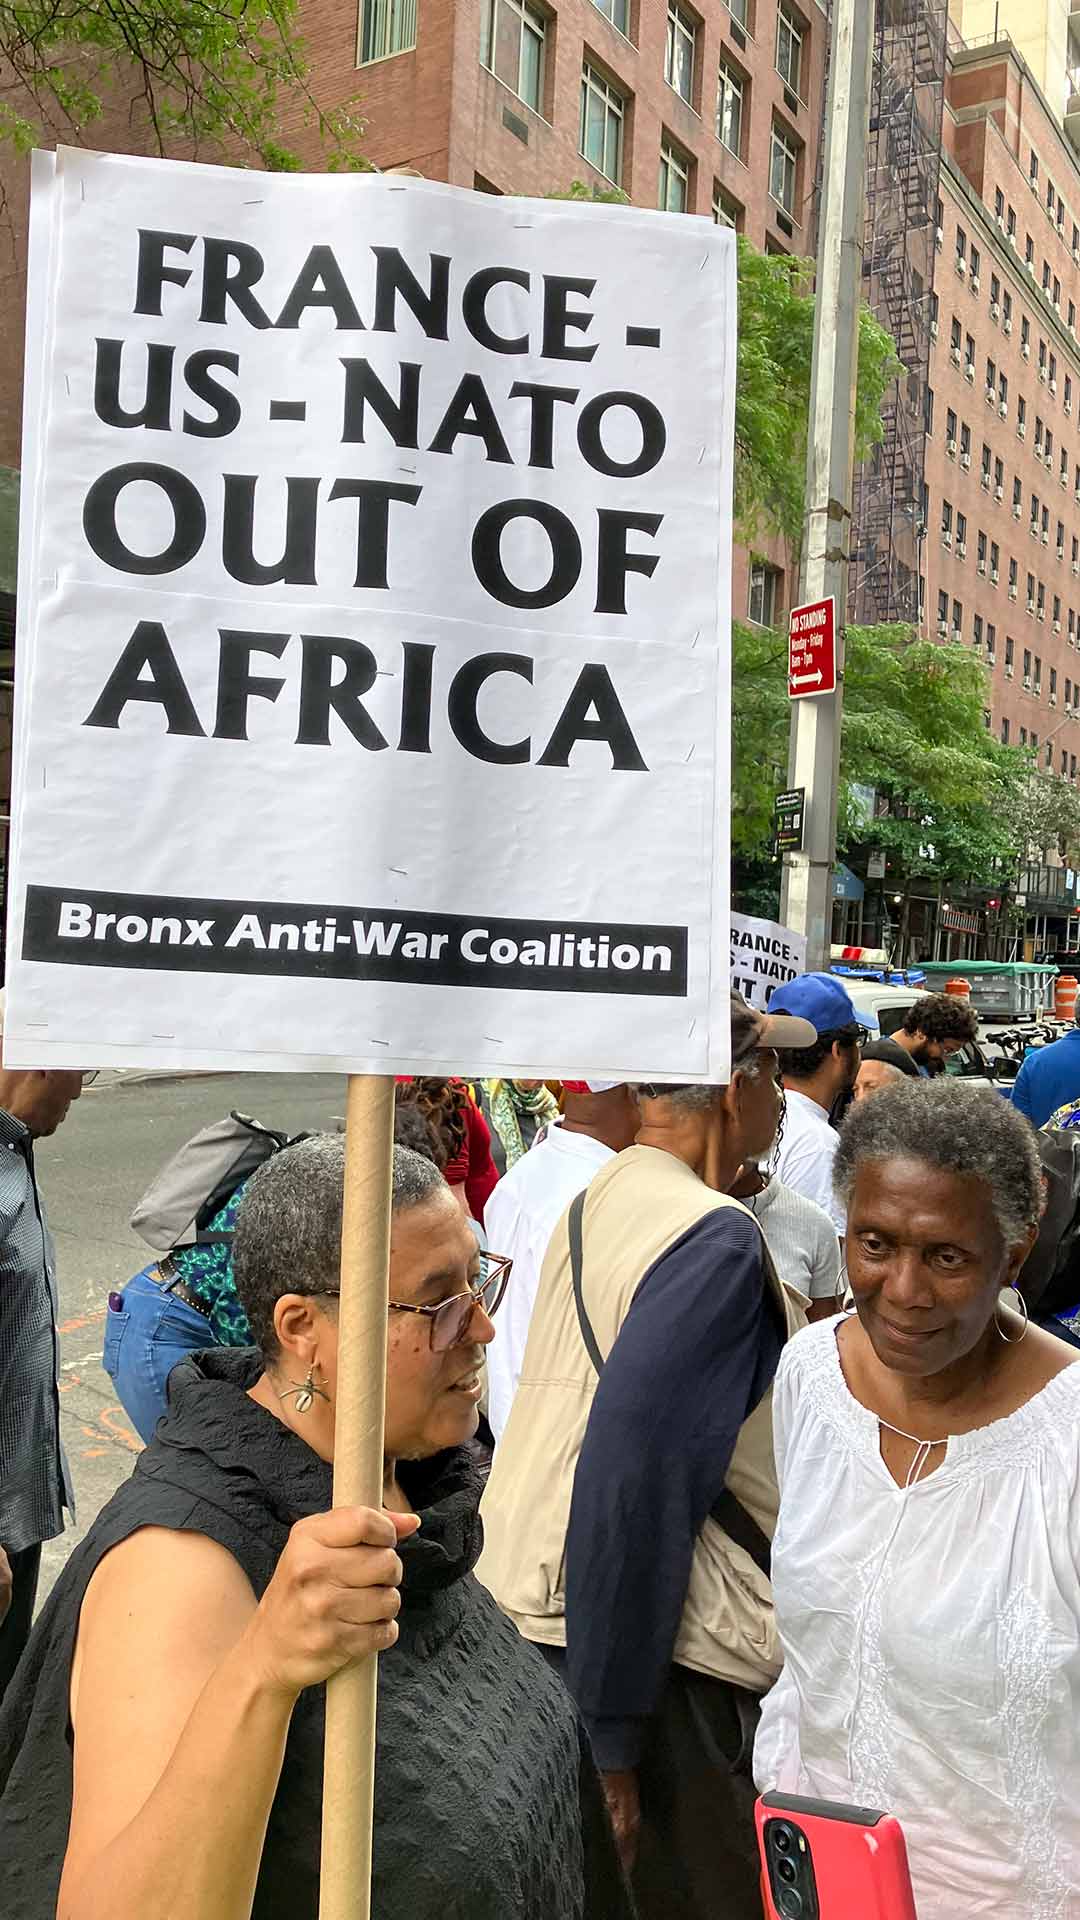 U.S./NATO Out of Africa